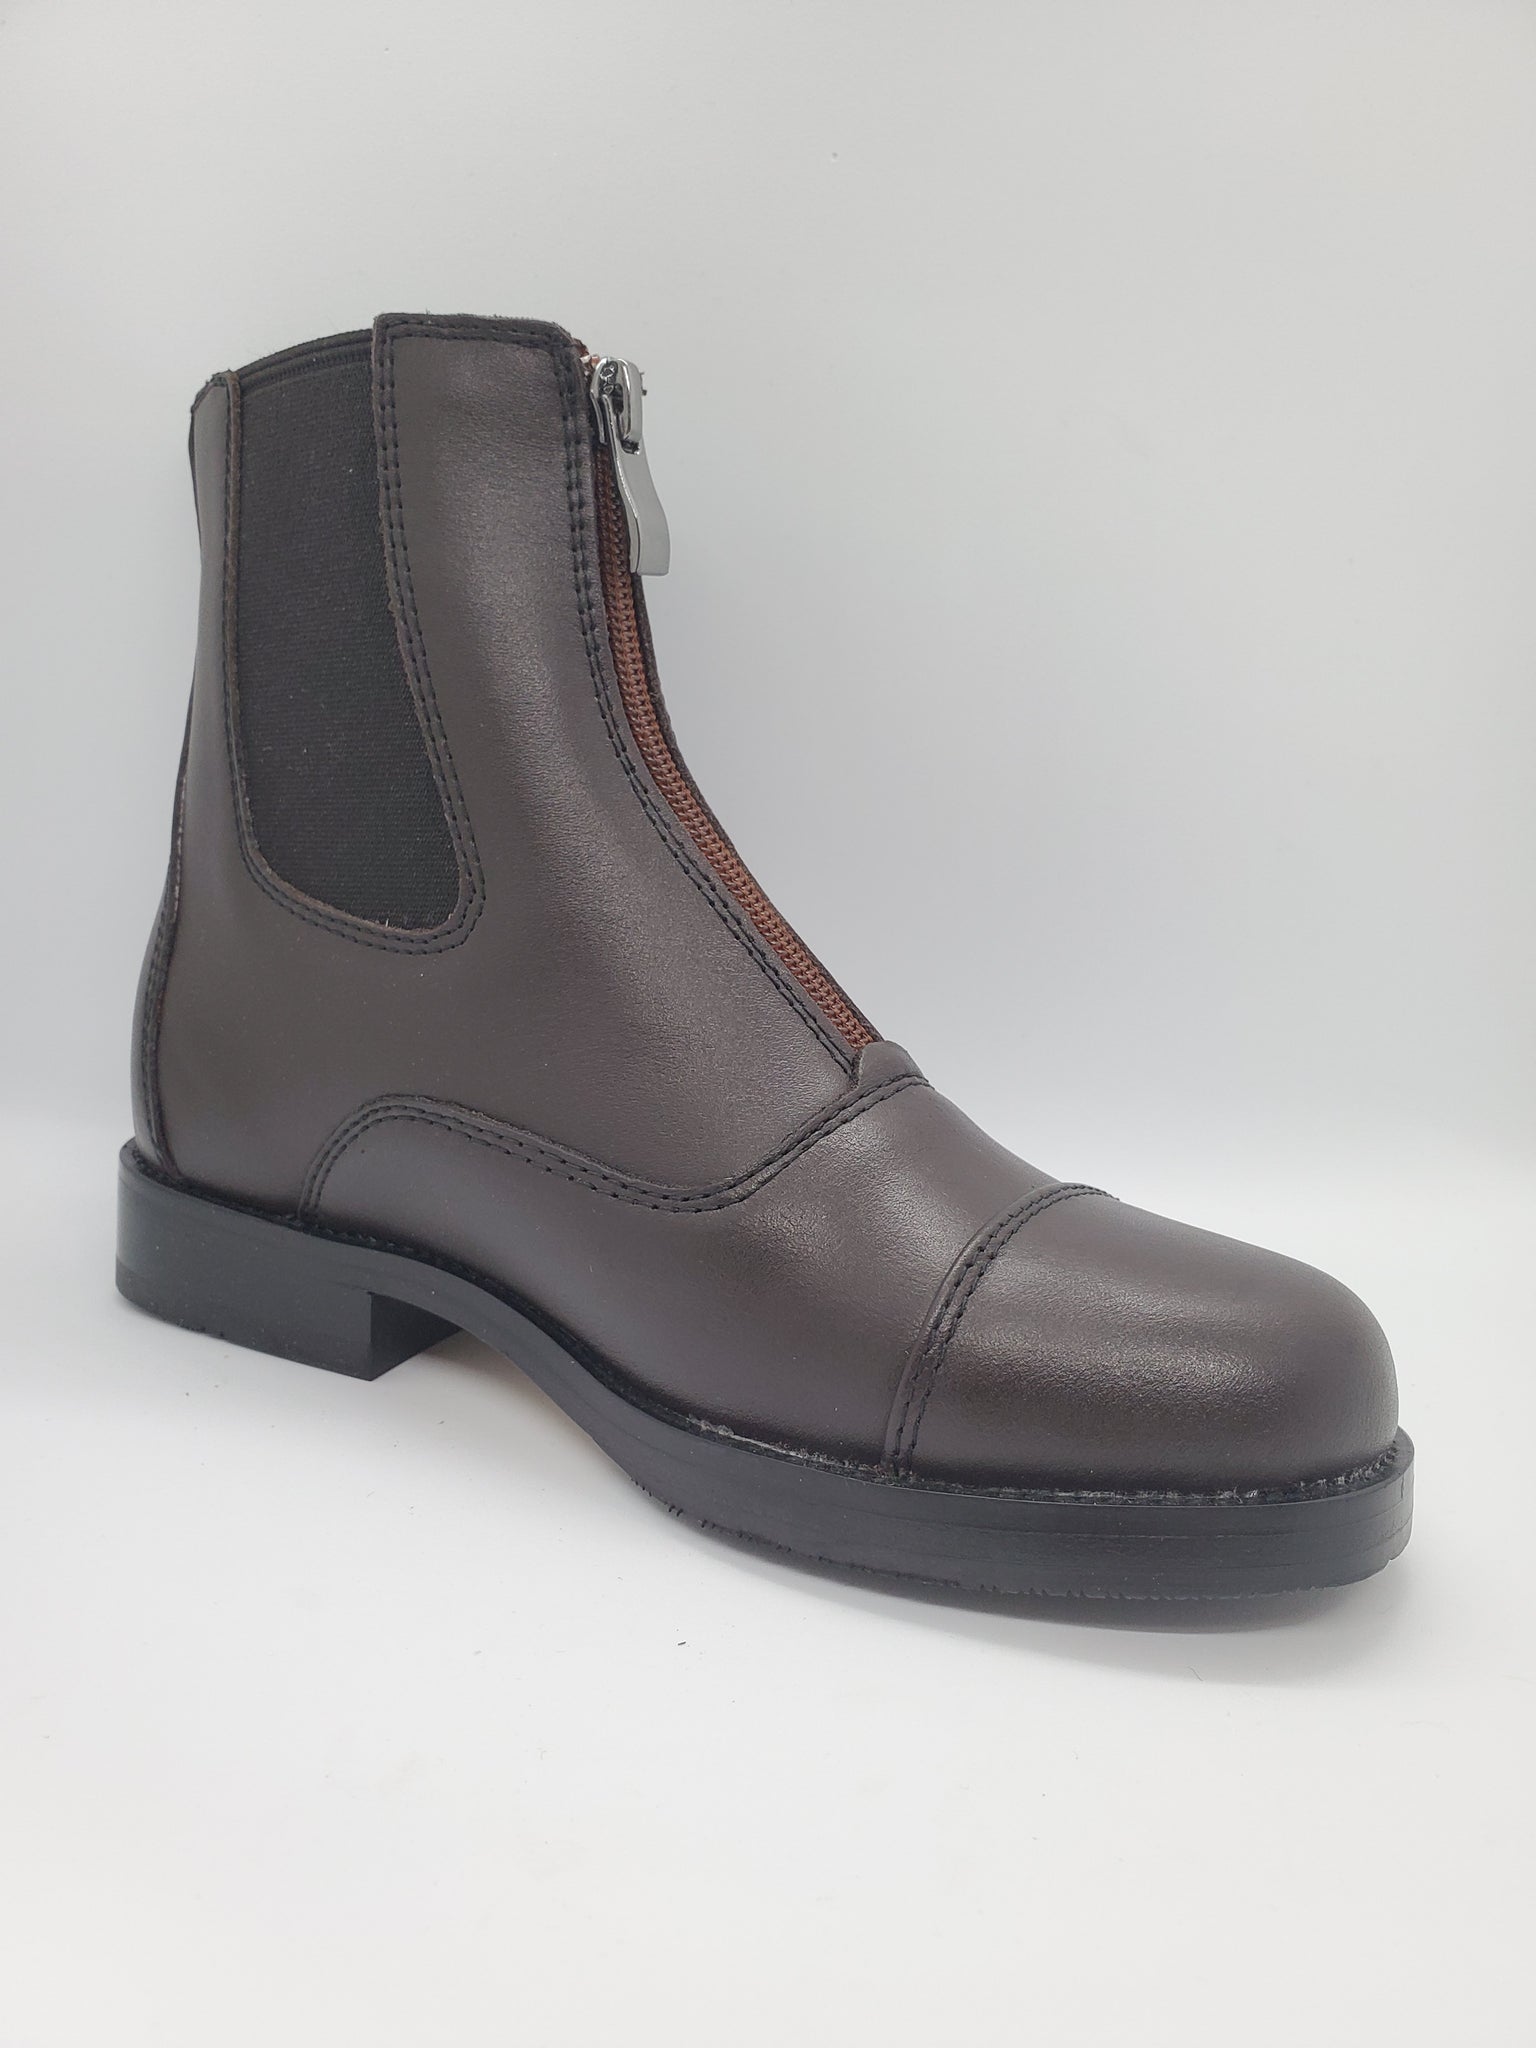 Leather chaps boots, gaiter boots, gaiters boots, leather boots, leather shoes